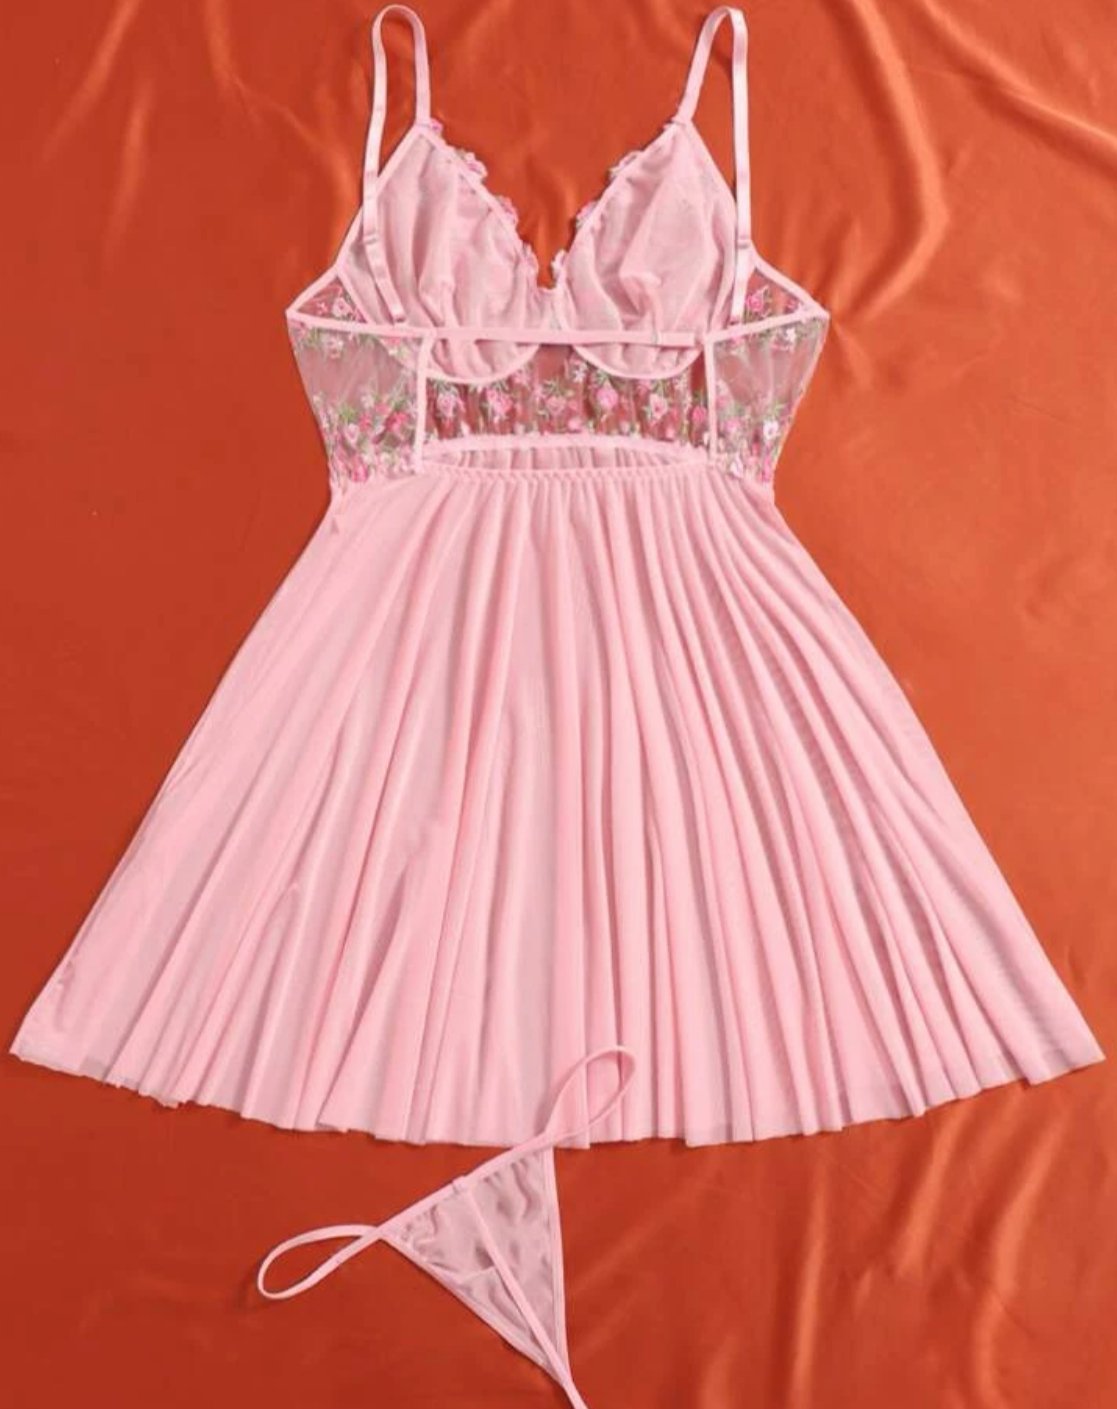 Plus Size Lingerie Pink Embroidered Set - Self Care Shop